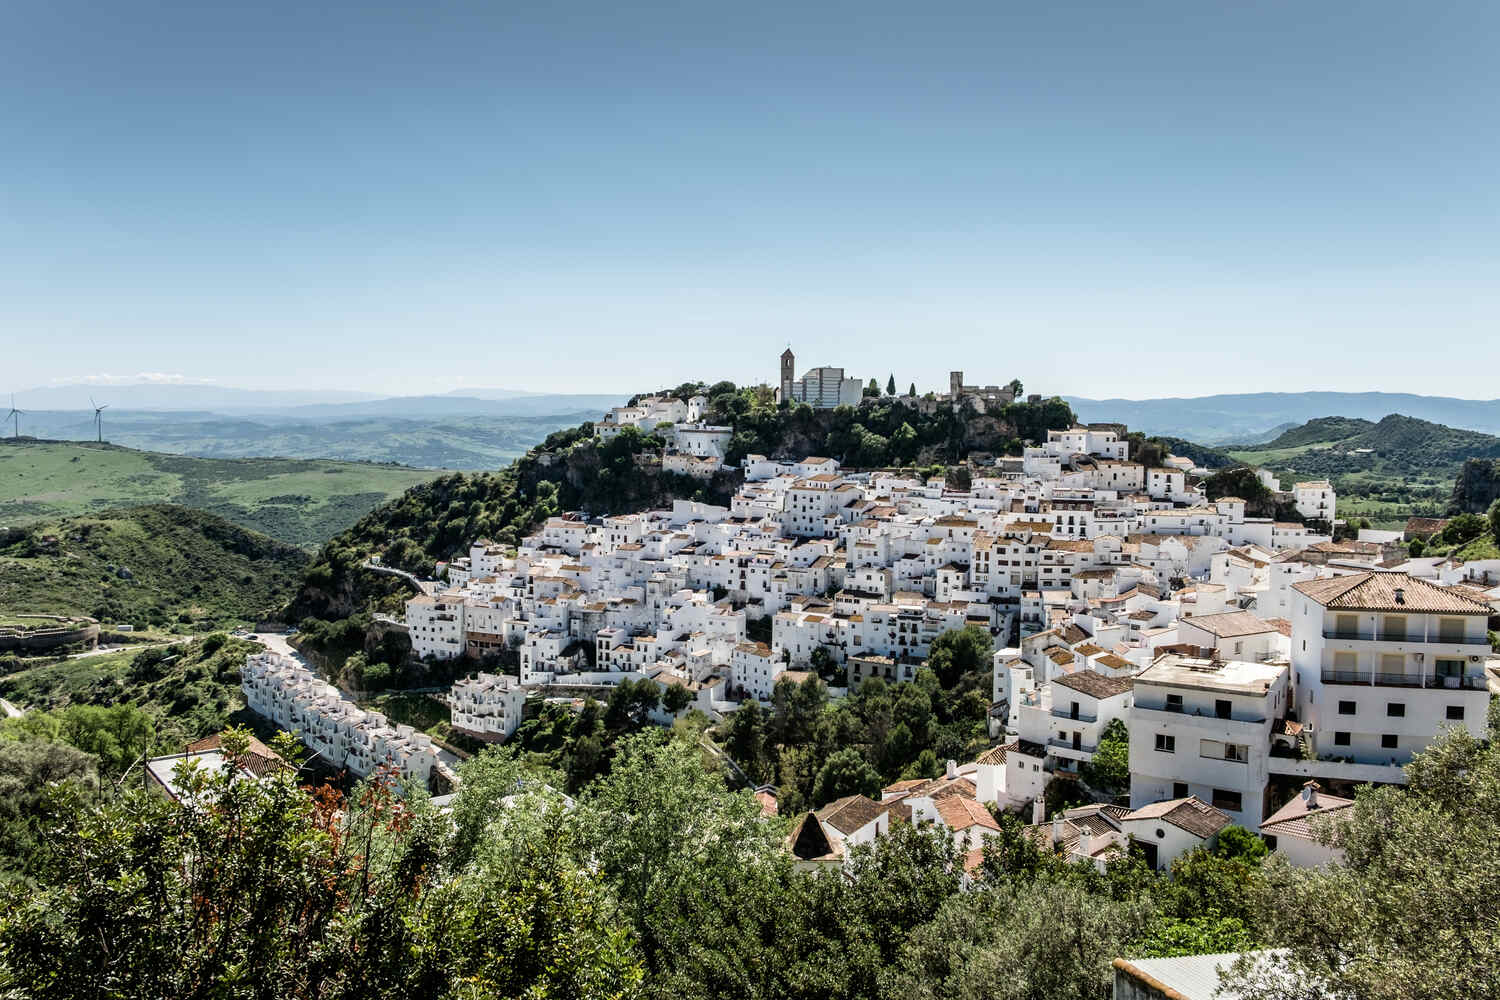 Hilltop-view-of-Casares-white-buildings-clustered